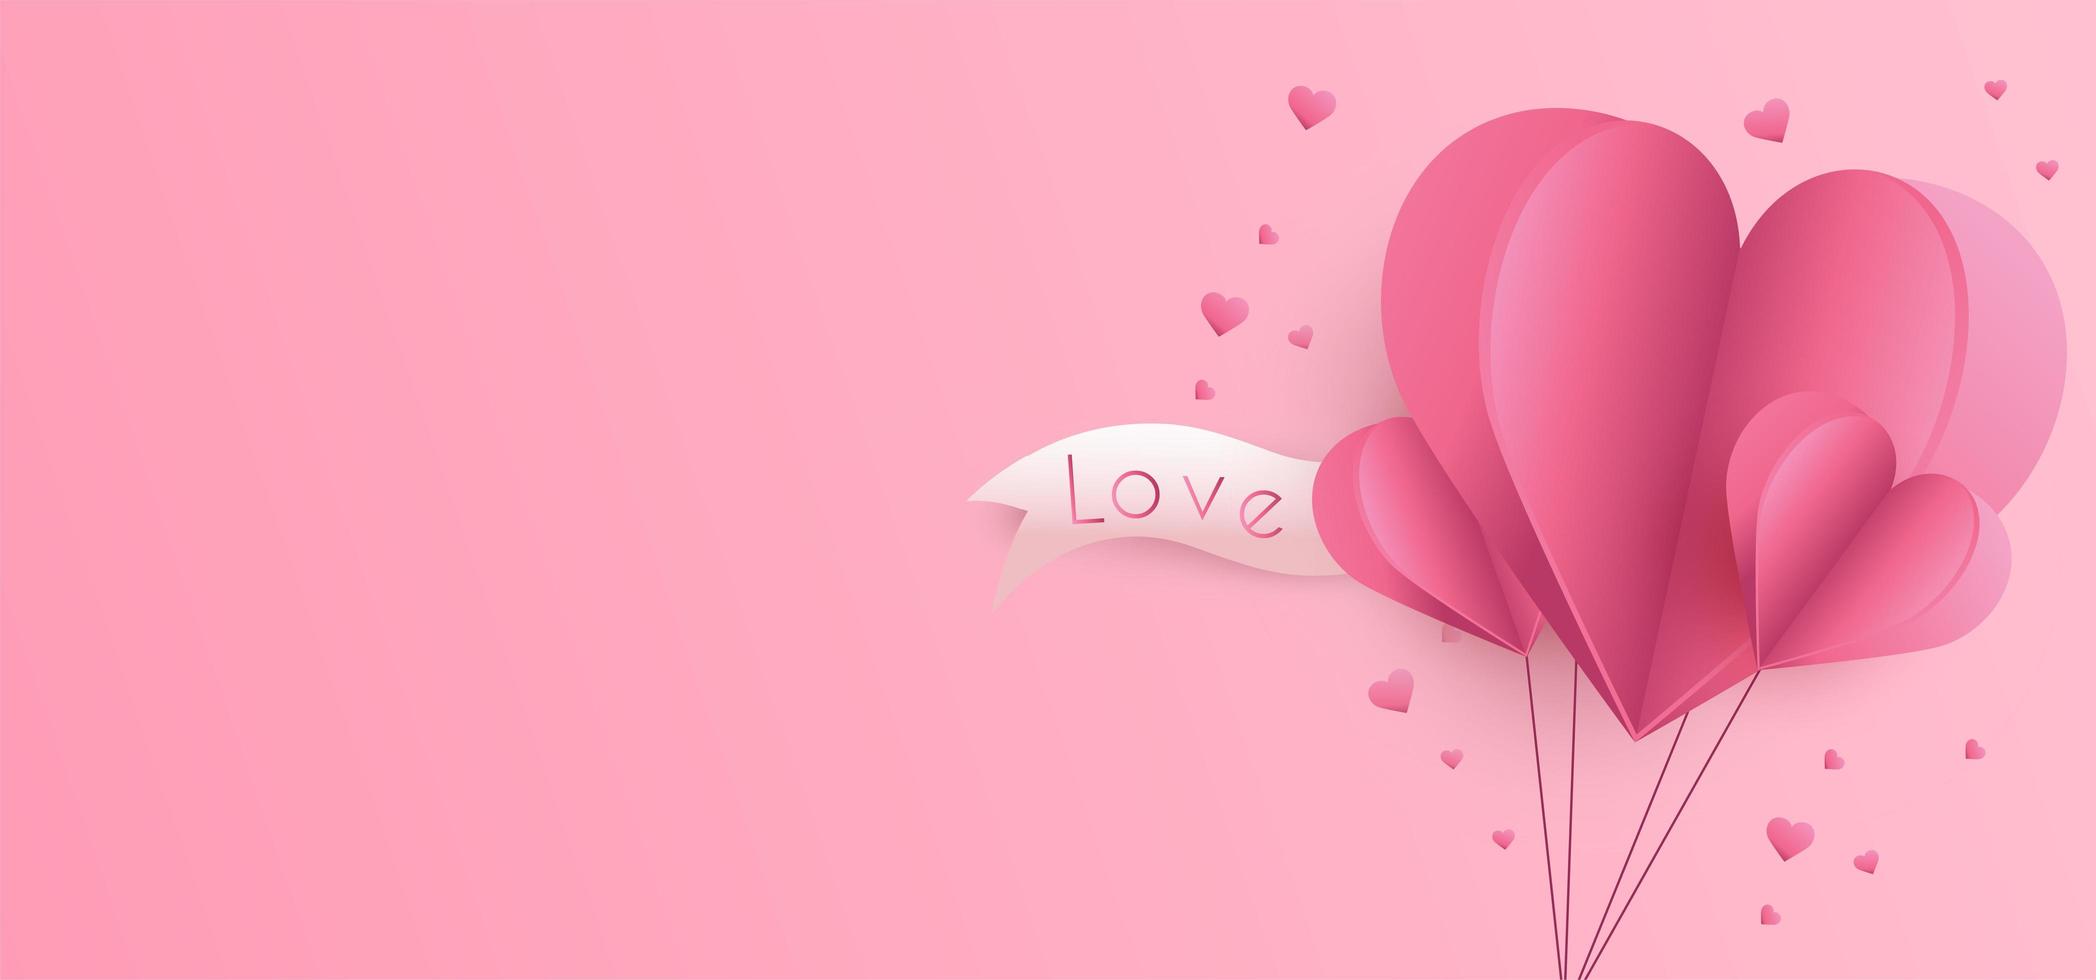 Valentine's Day background with paper cut hearts  vector